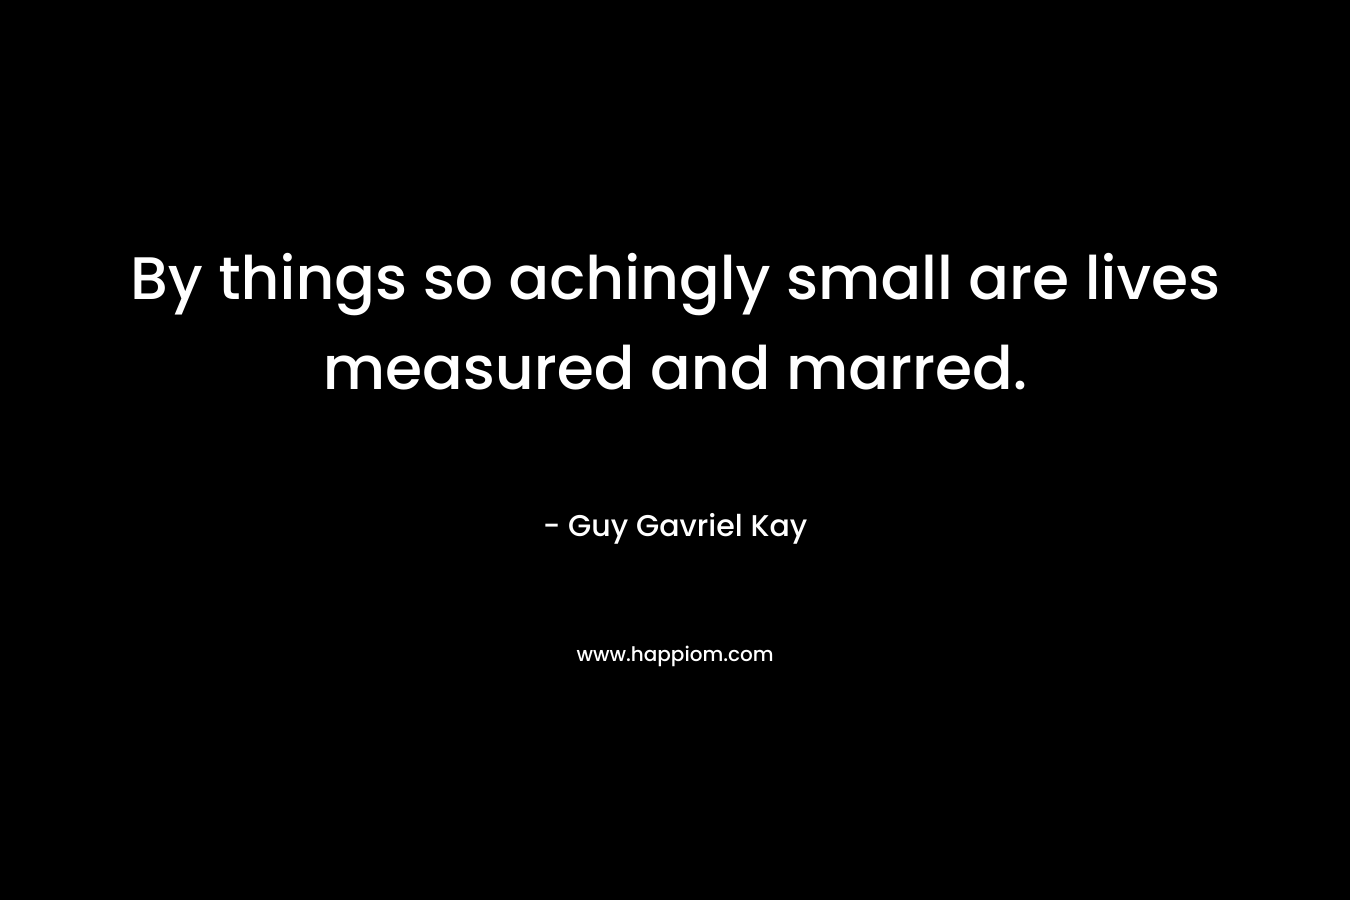 By things so achingly small are lives measured and marred. – Guy Gavriel Kay